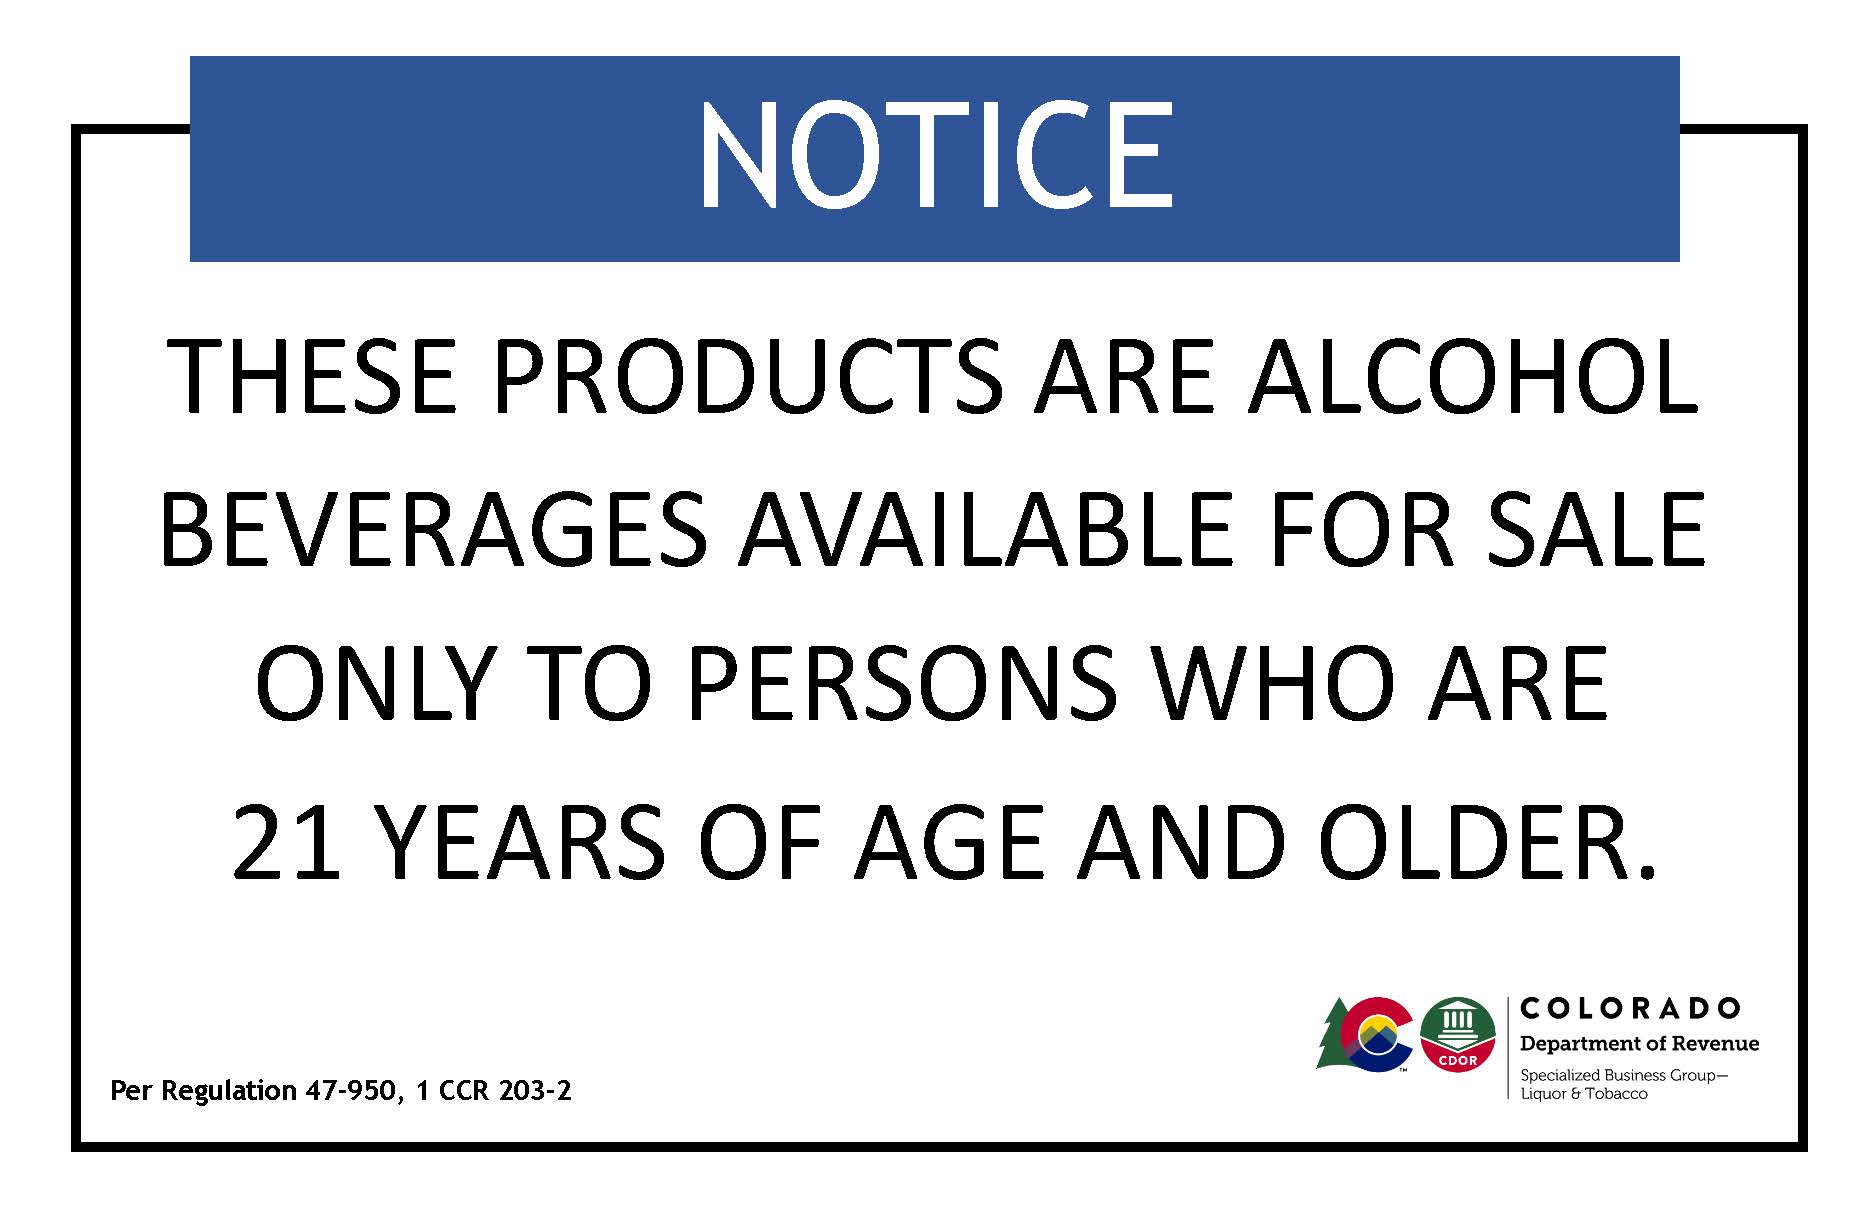 Notice Banner Square - These products are alcohol beverages available for sale only to persons who are 21 years of age and older.